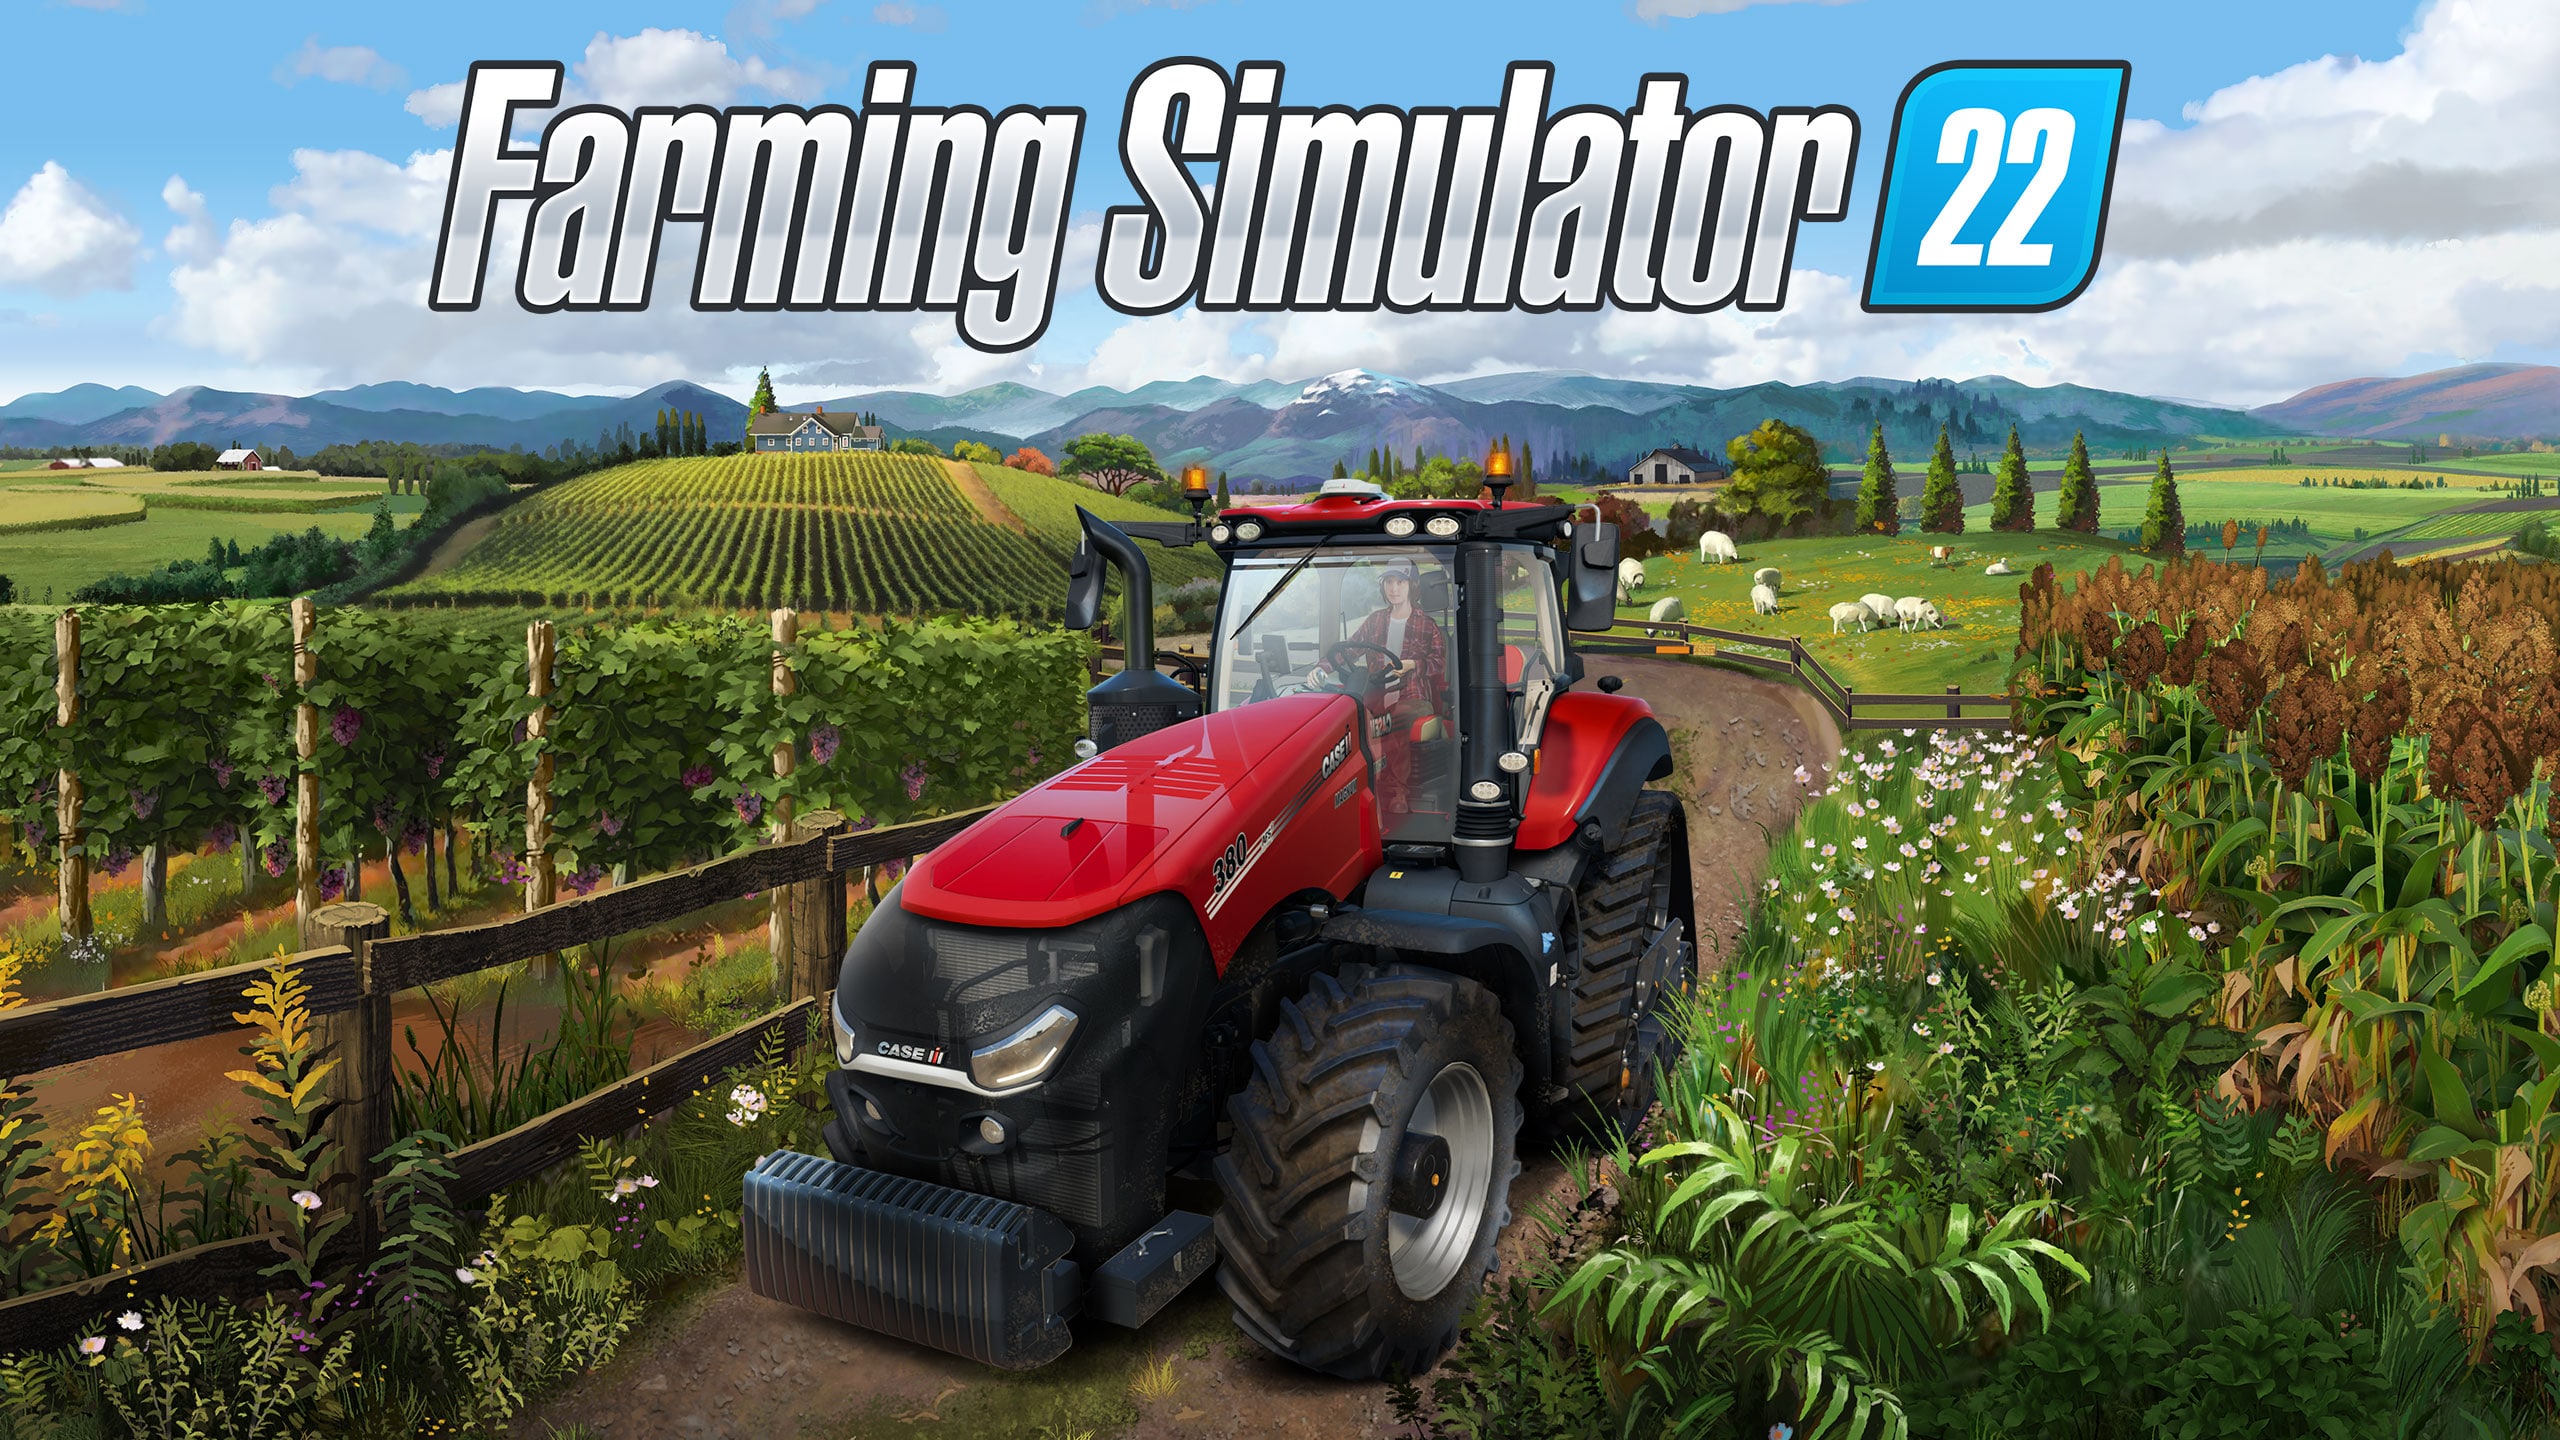 Cover image for Farming Simulator 22 with a silhouetted vehicle in harvest season